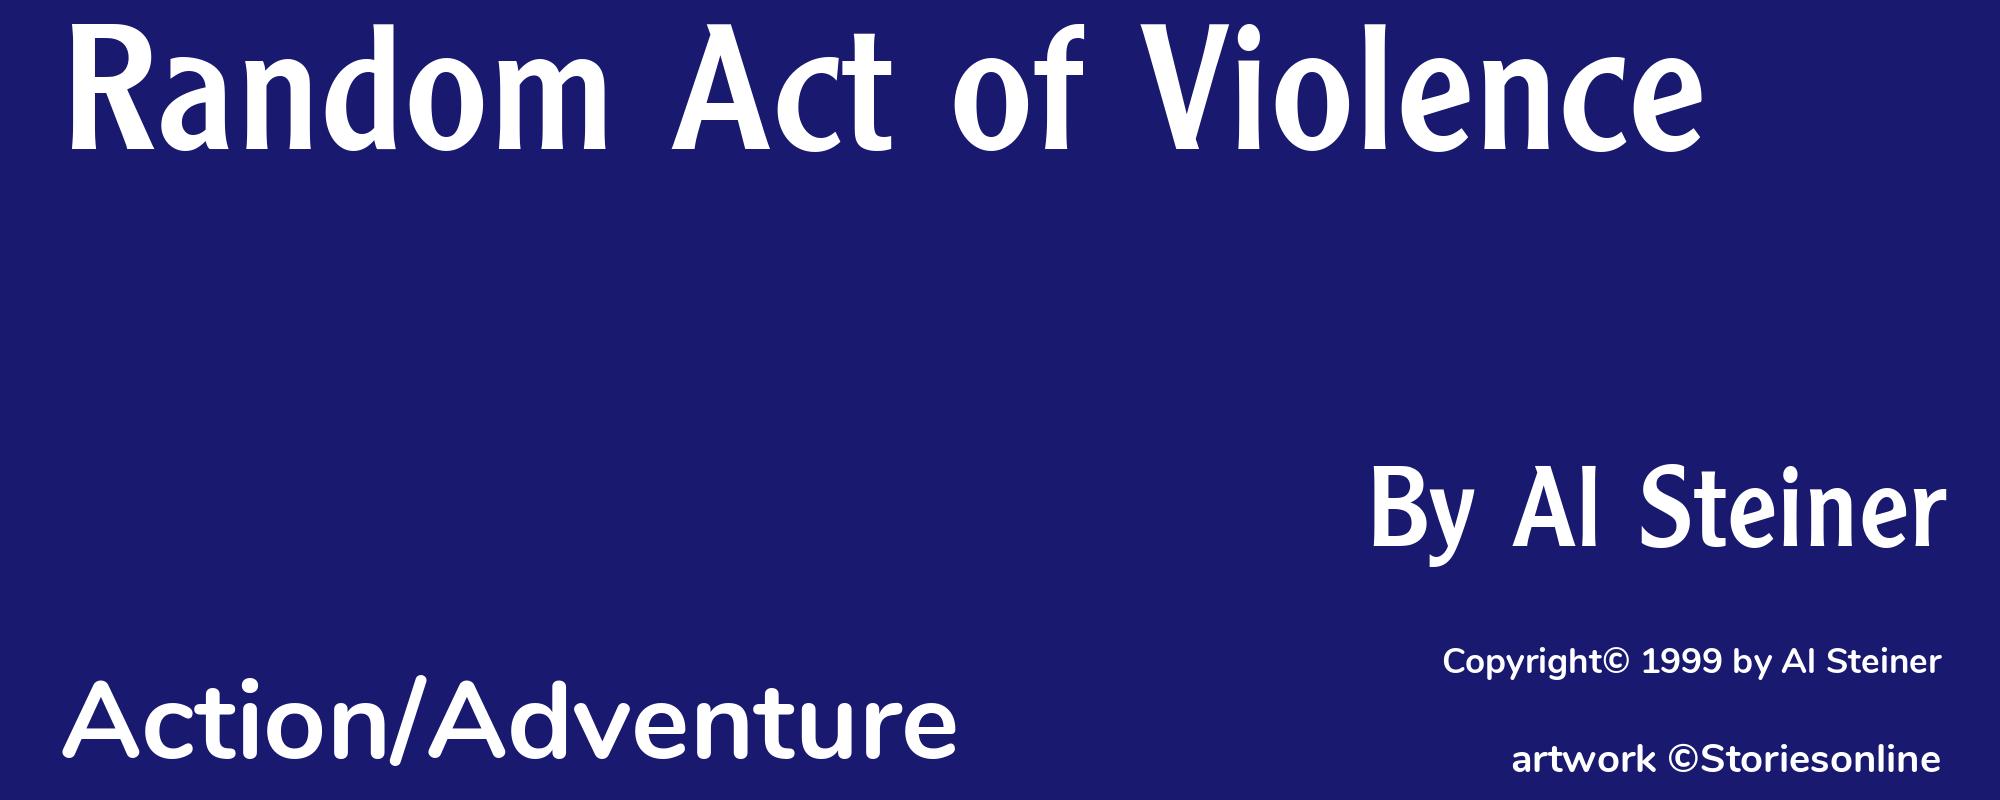 Random Act of Violence - Cover